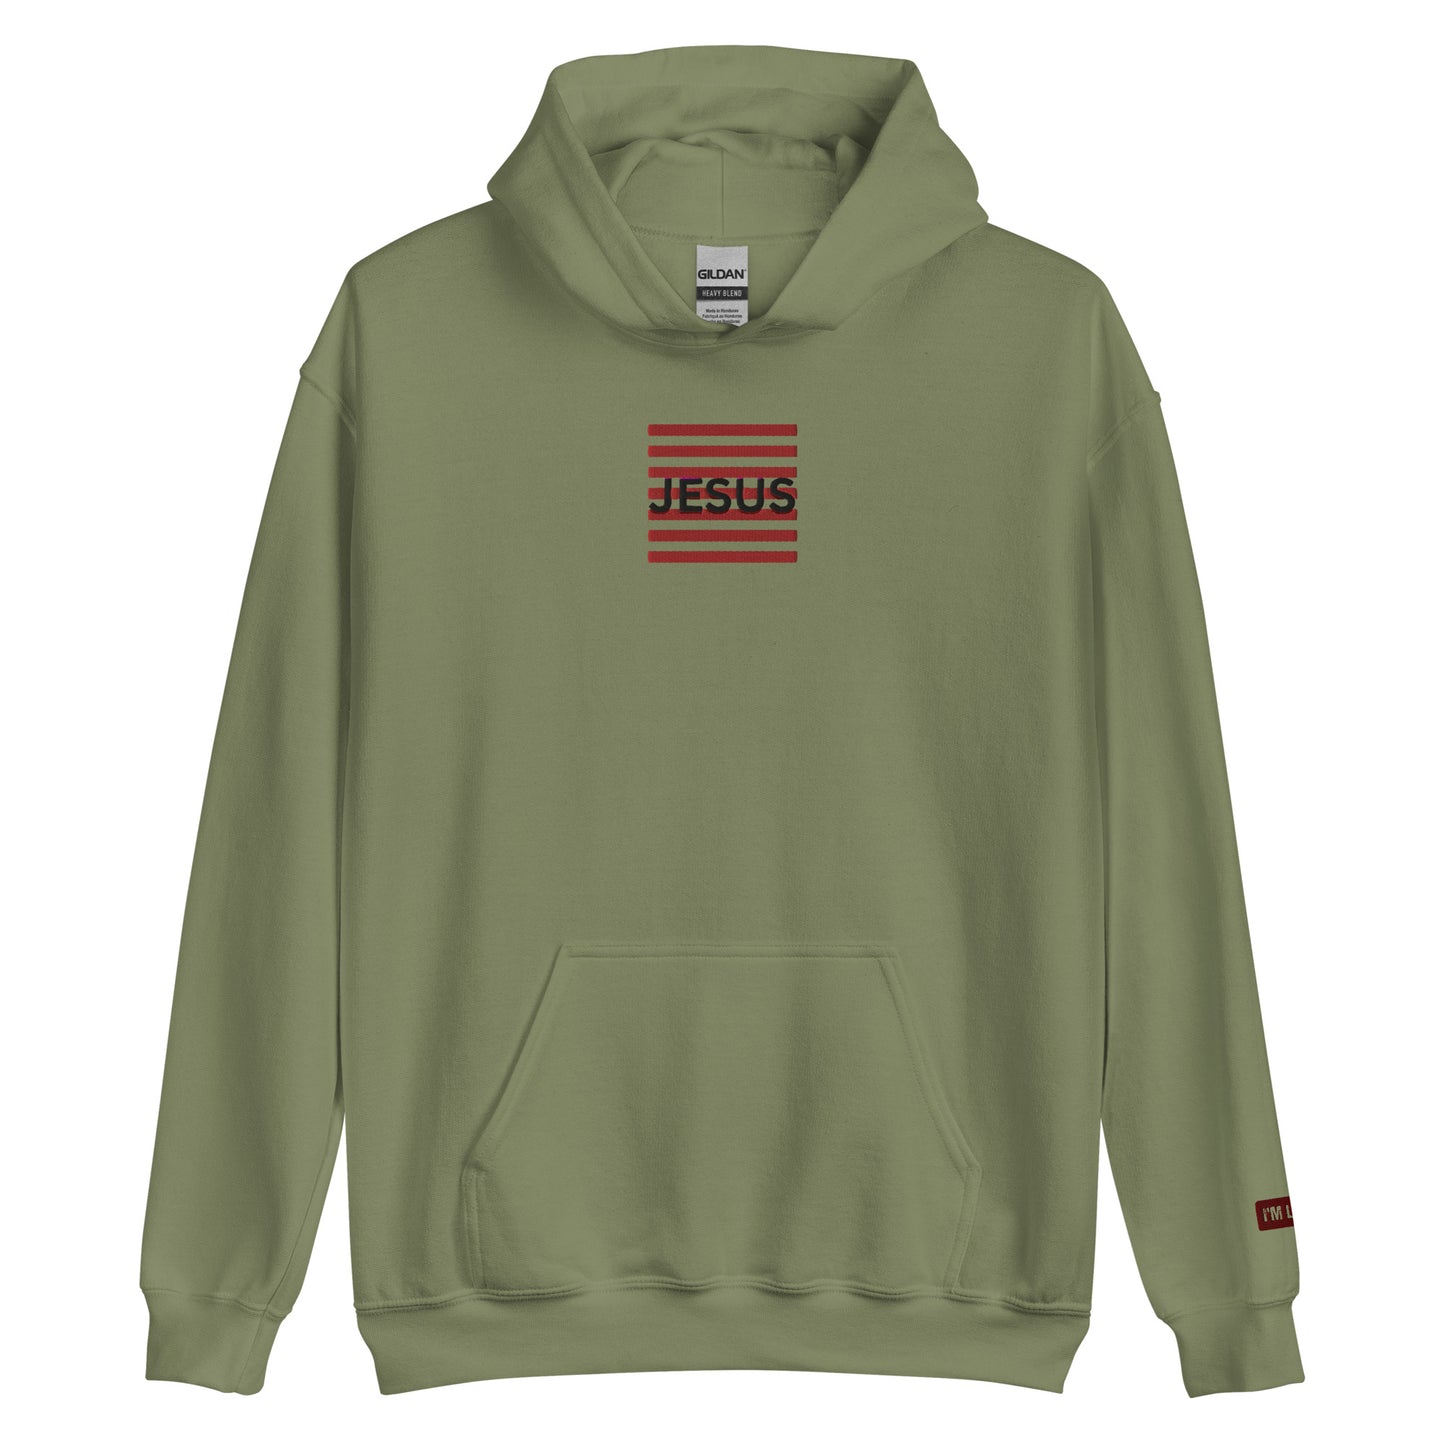 Jesus Embroidery Unisex Hoodie - Military Green / S